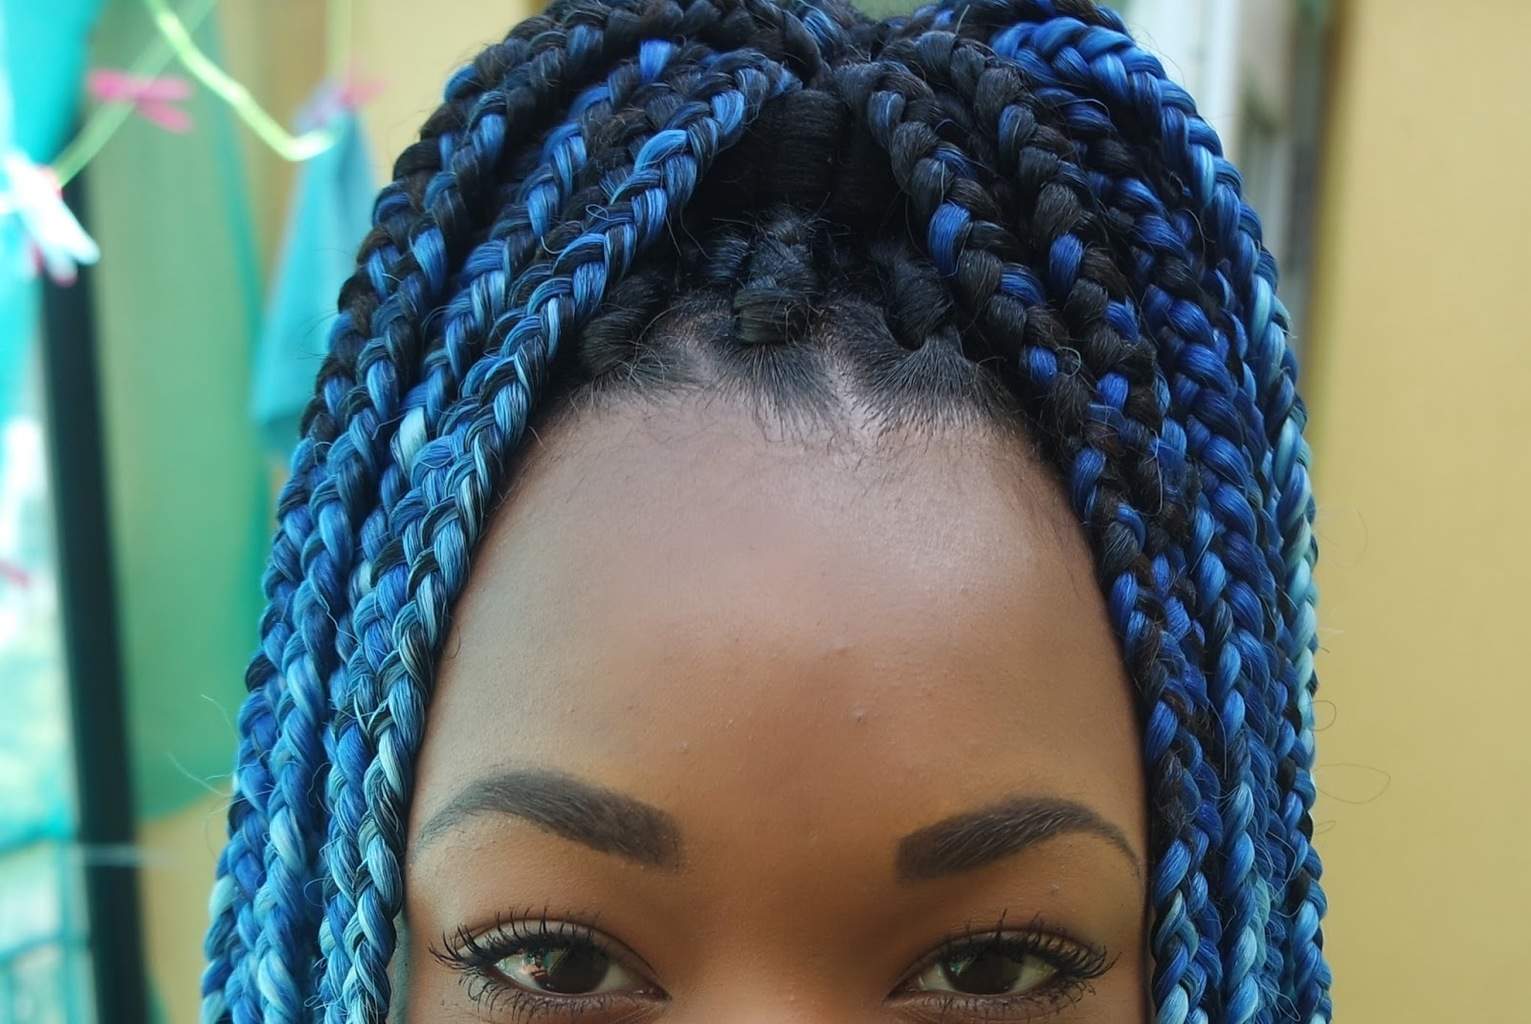 Blue Box Braids Hair: 10 Stunning Styles to Try - wide 7